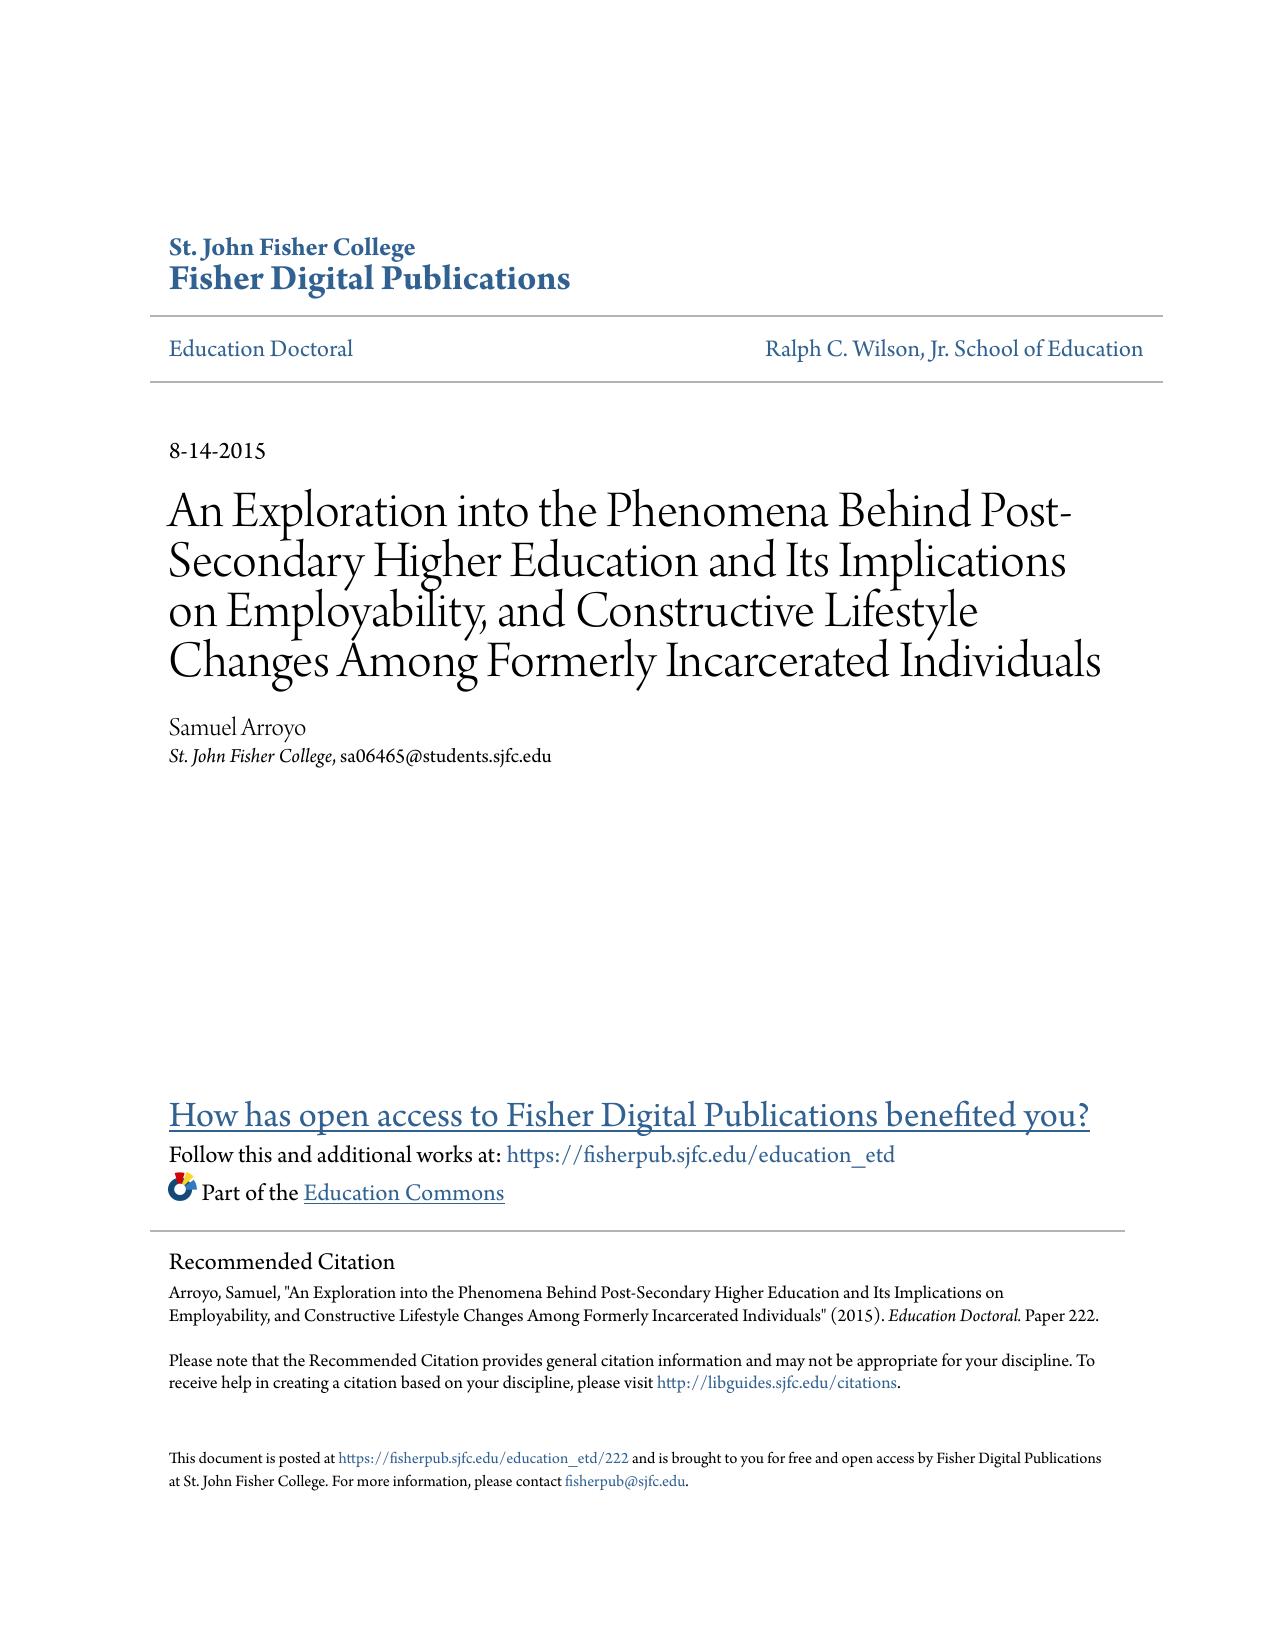 An Exploration into the Phenomena Behind Post-Secondary Higher Education and Its Implications on Employability, and Constructive Lifestyle Changes Among Formerly Incarcerated Individuals